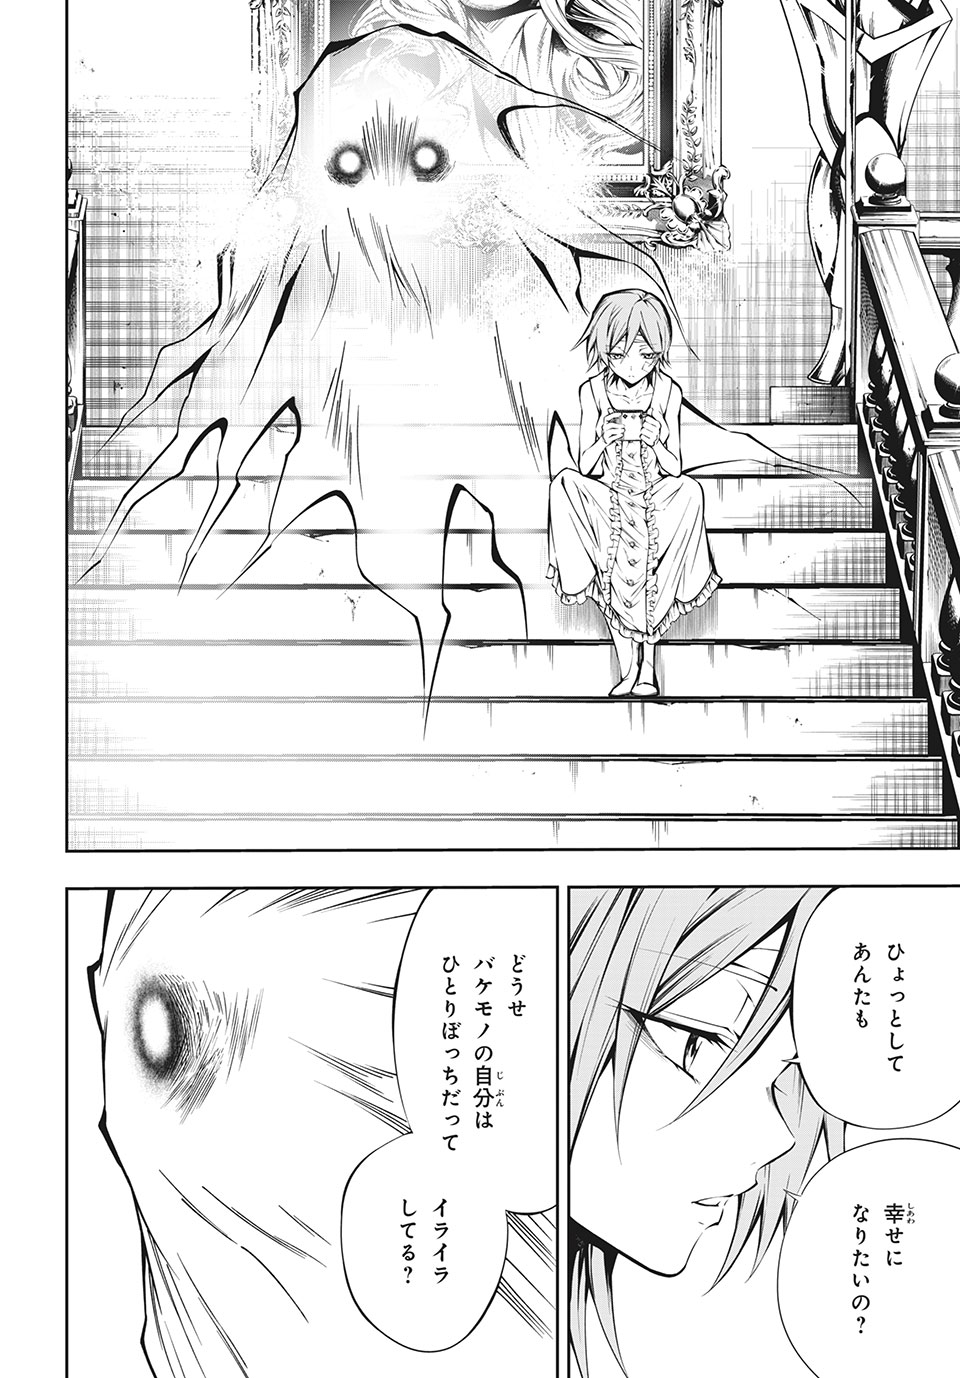 Shaman King: and a garden 第1.3話 - Page 6